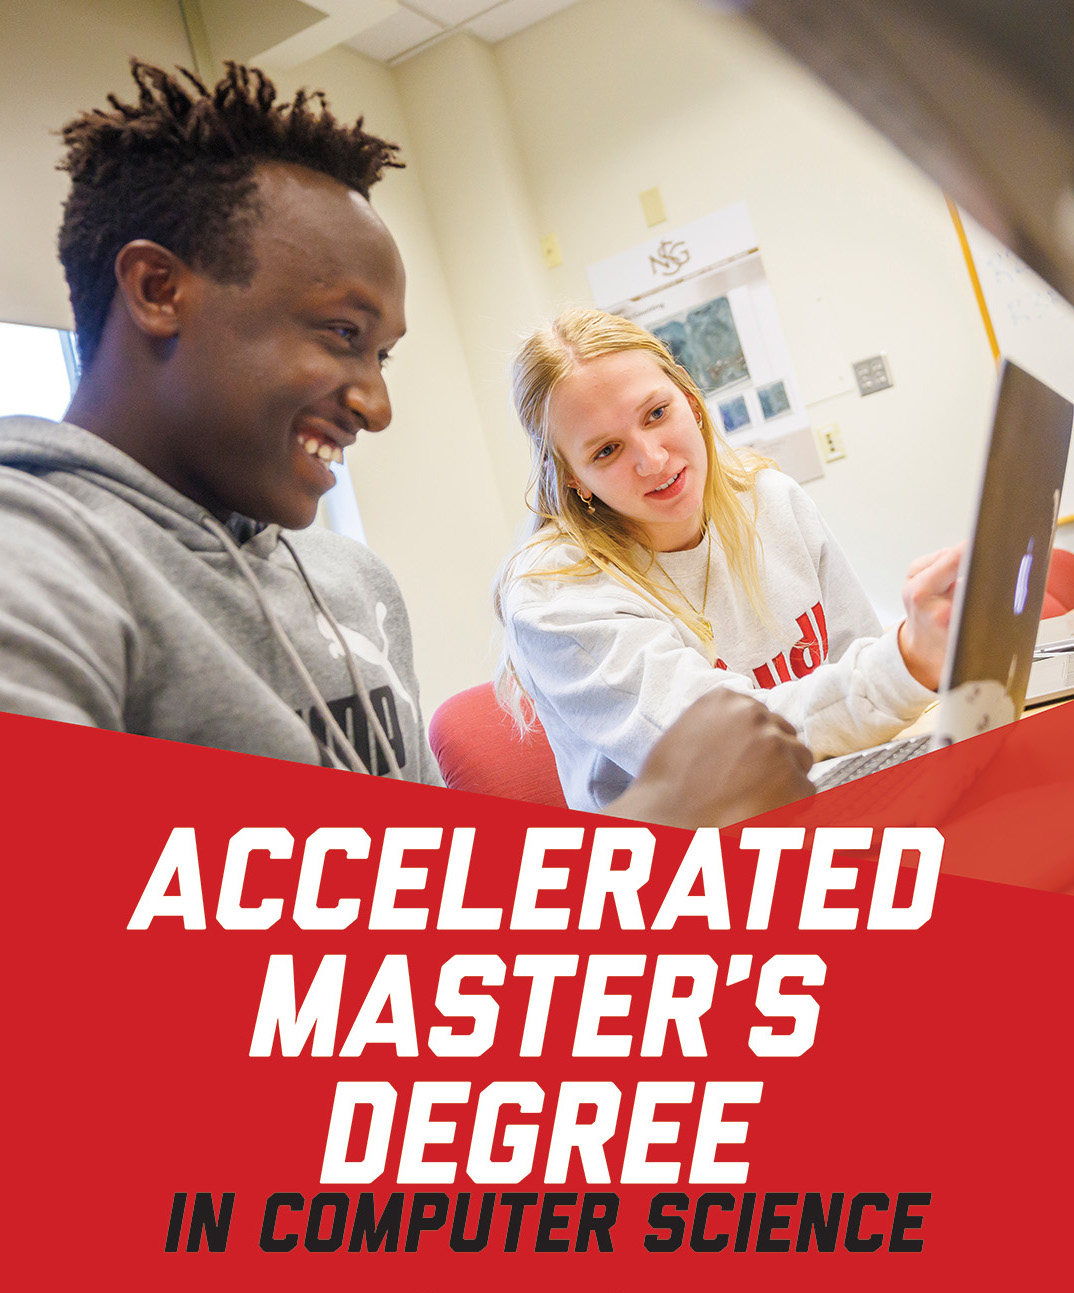 Attend the accelerated master's degree info session on Oct. 3.